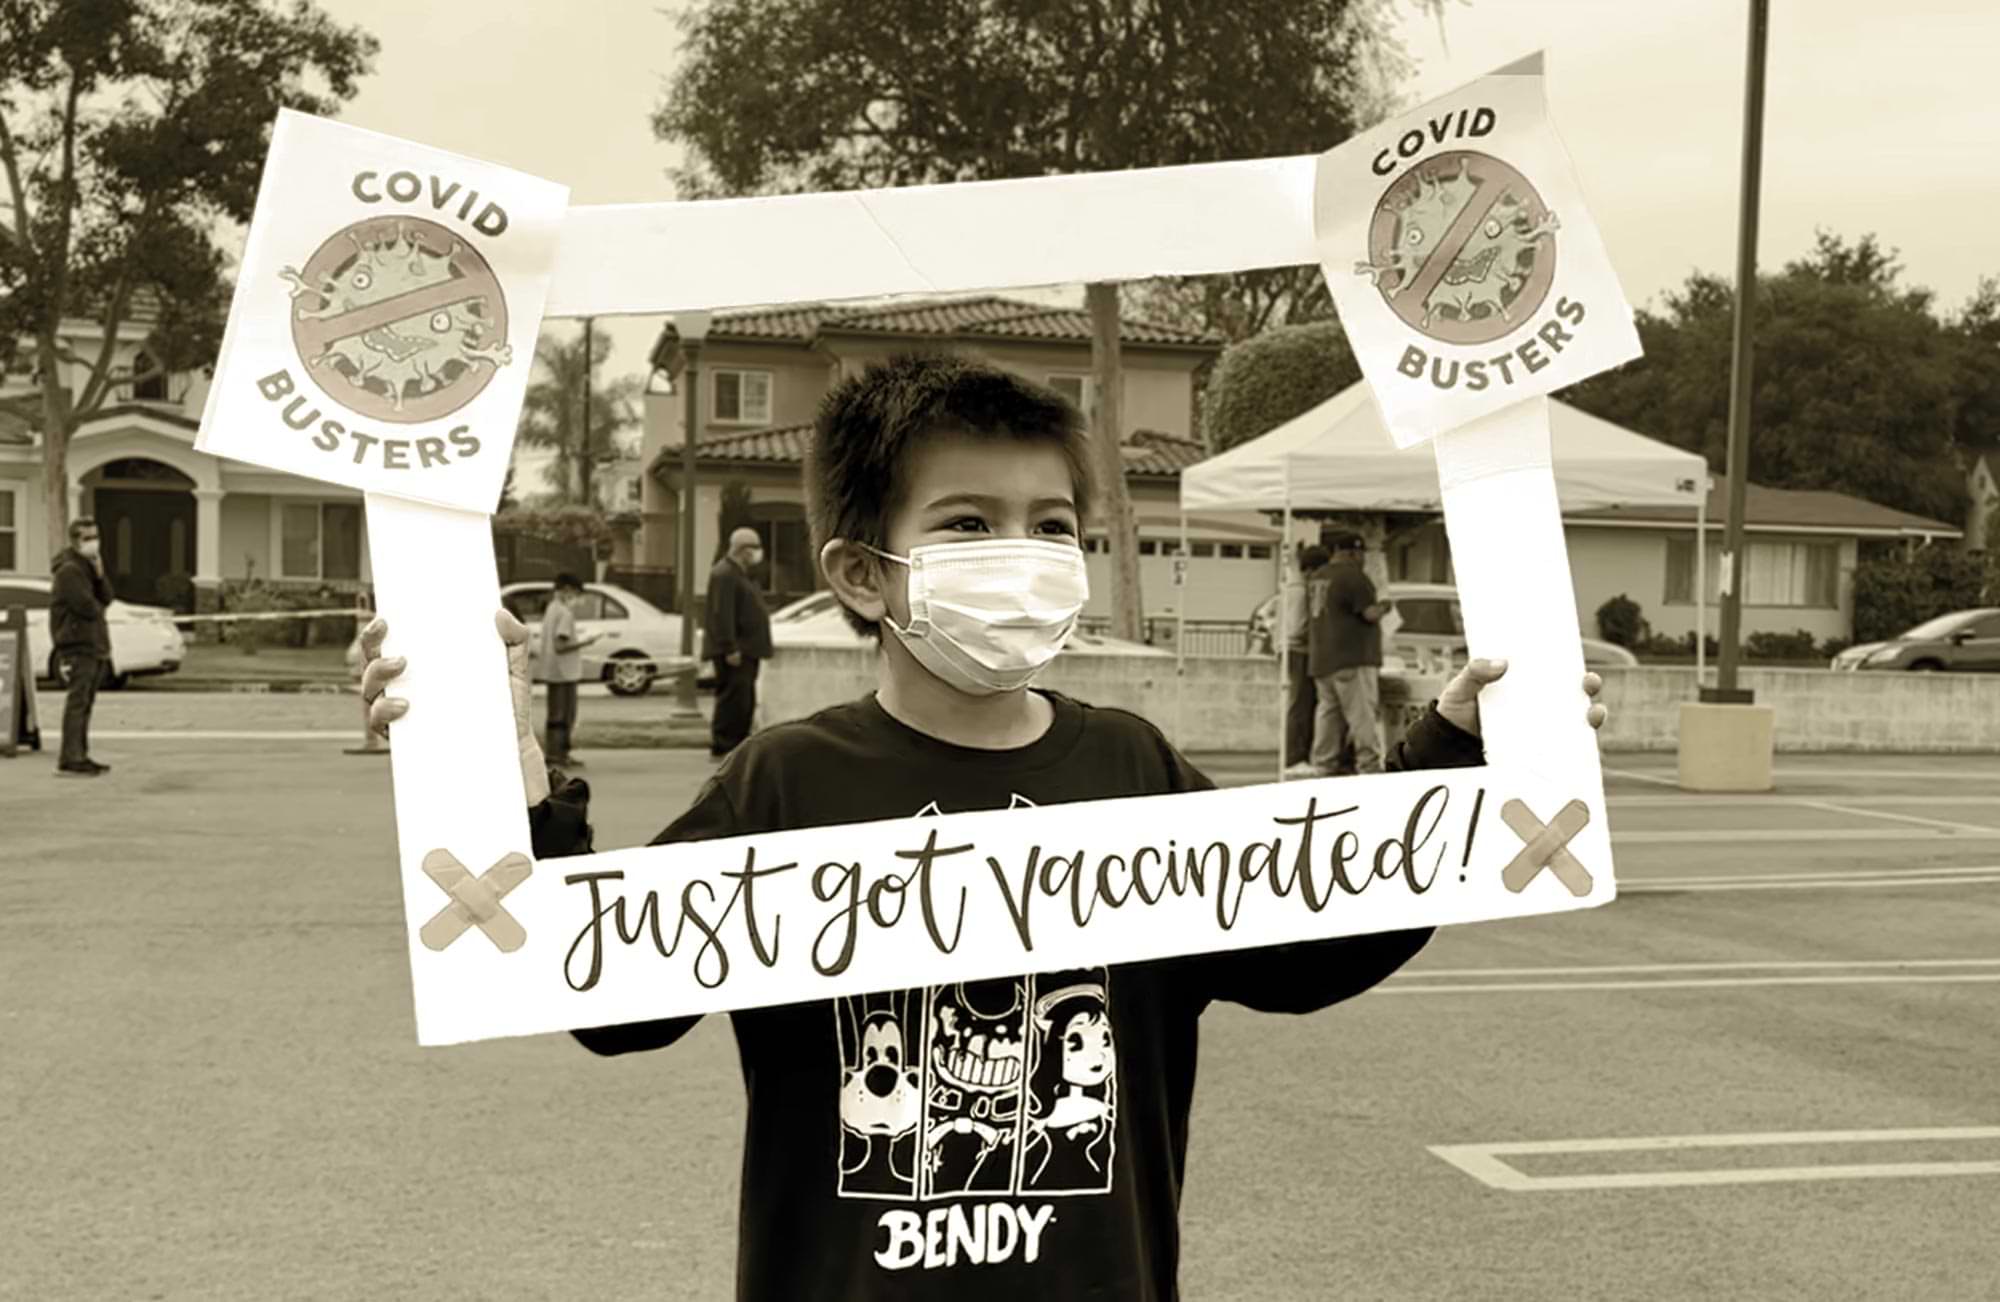 an elementary school aged child holds a frame sign reading "I just got vaccinated"